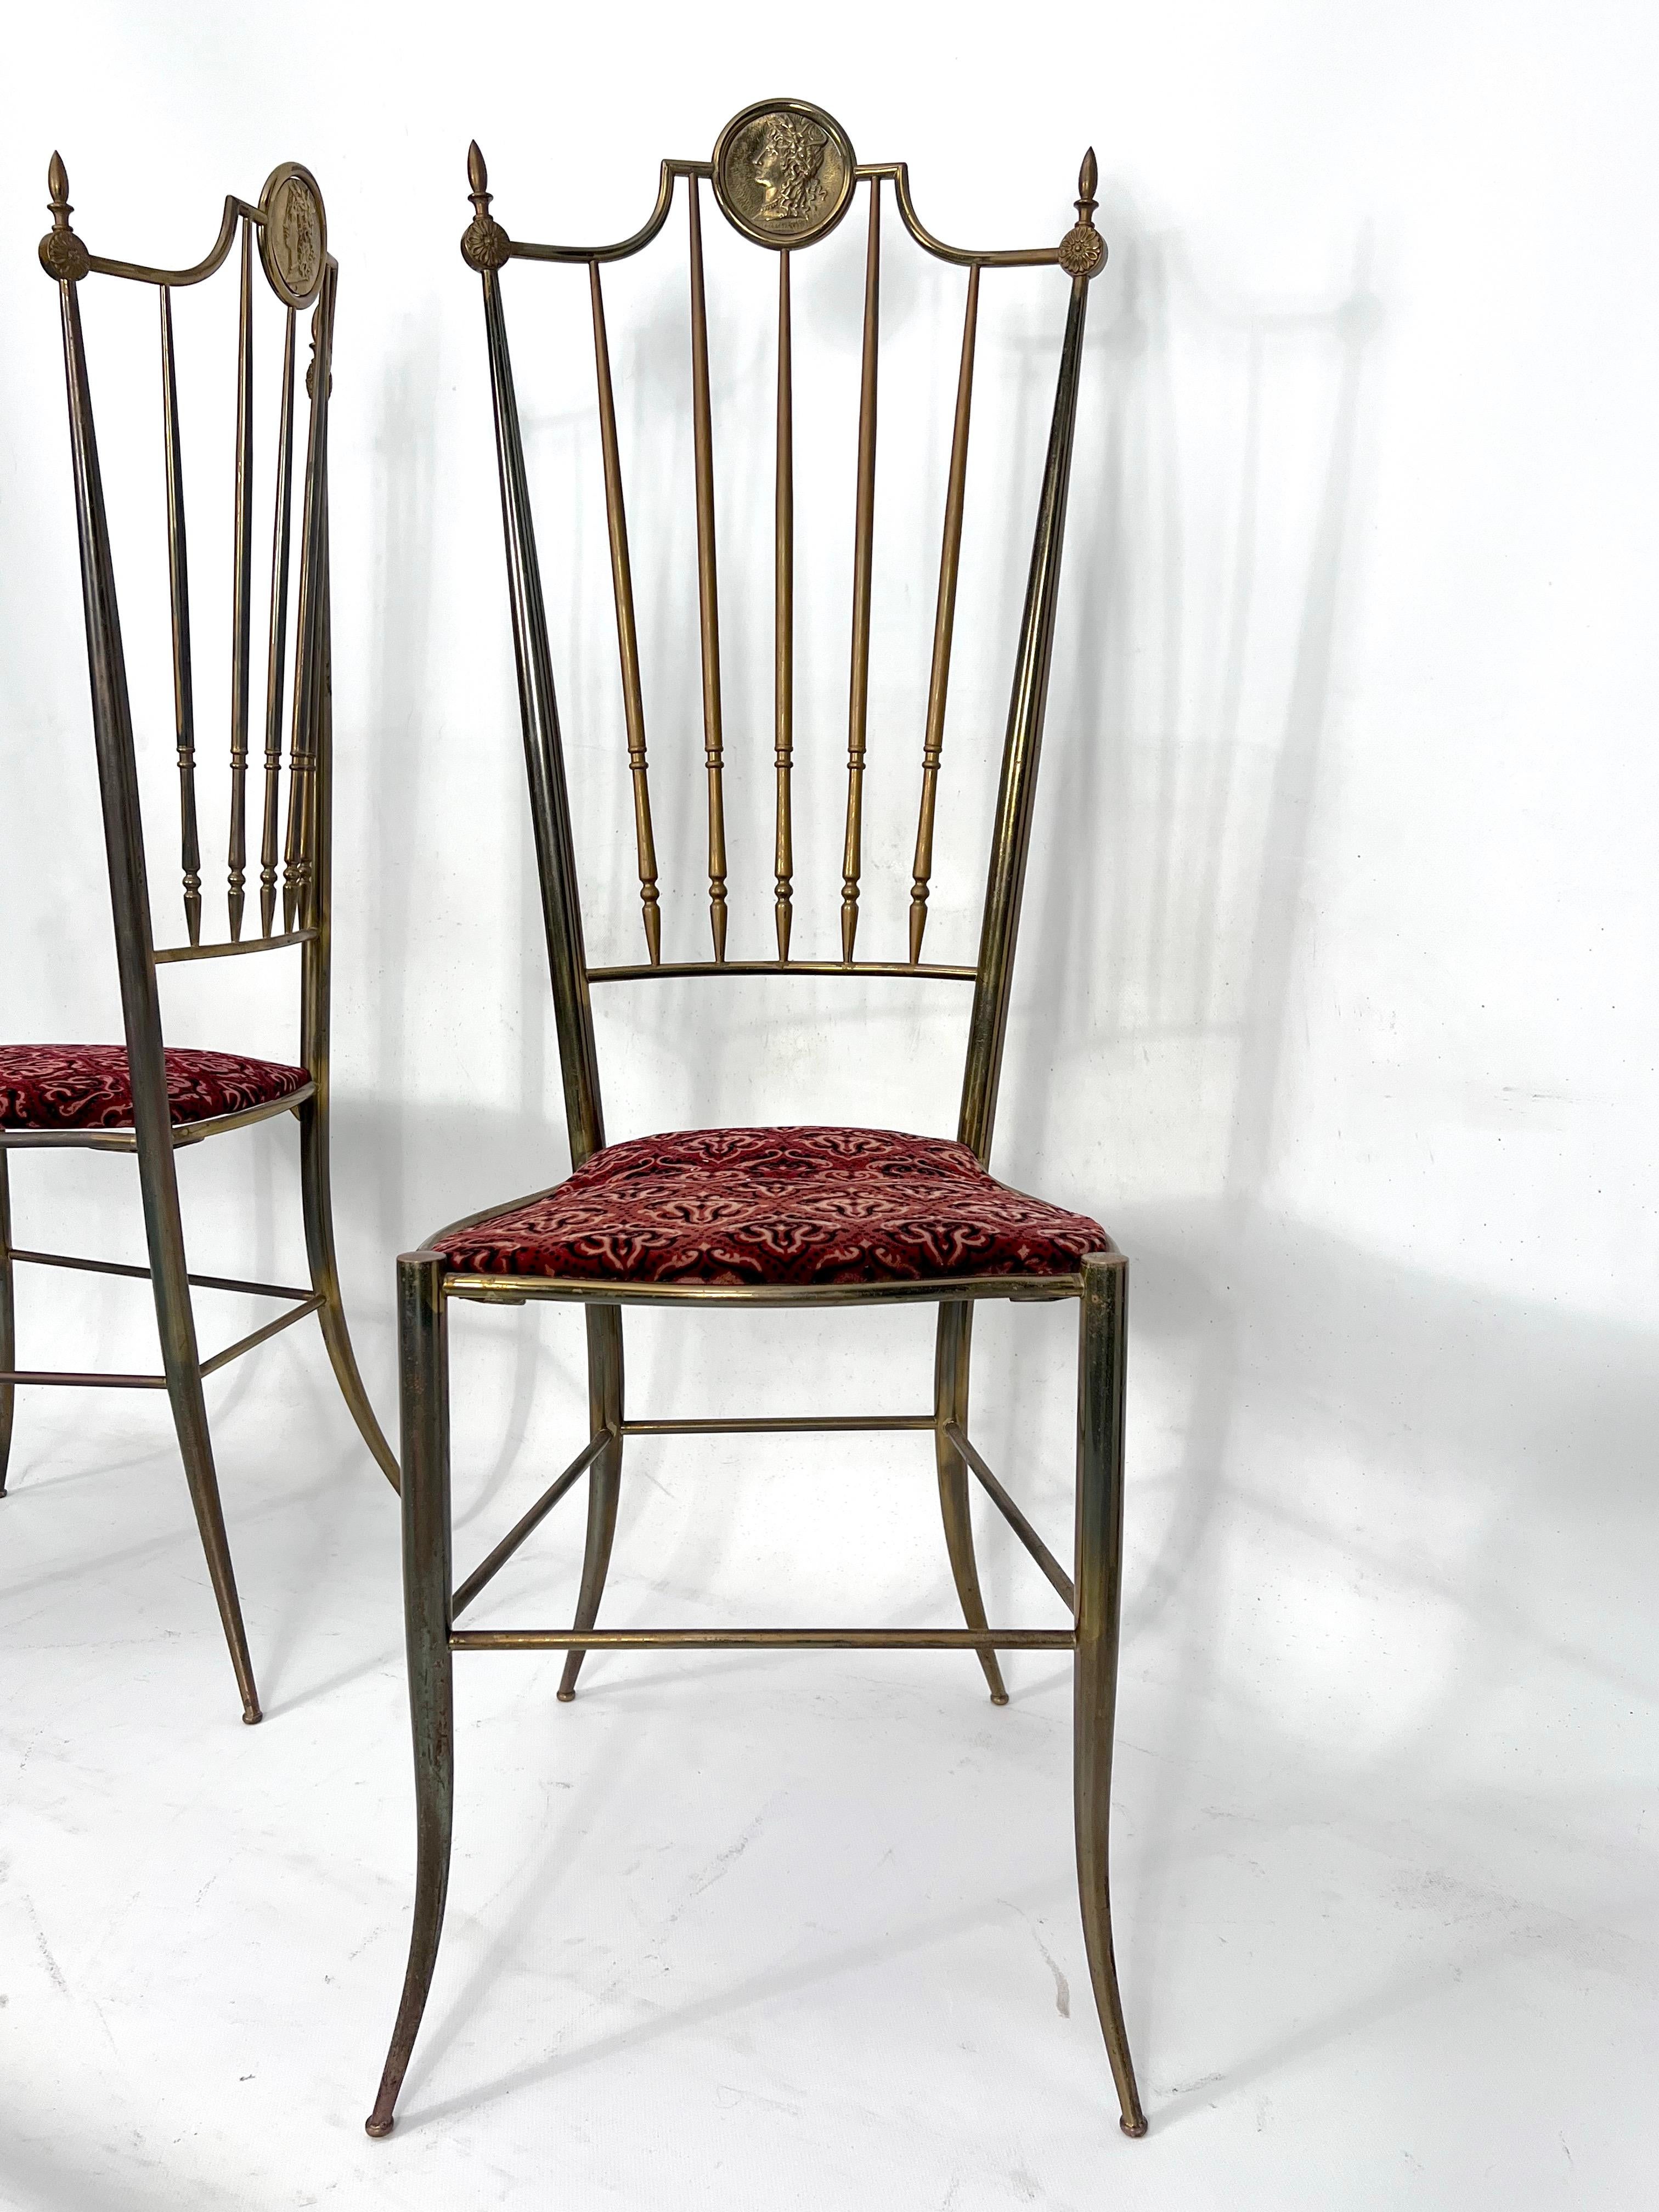 Vintage Pair of Brass Tall Chairs from Chiavari, Italy, 1950s For Sale 2